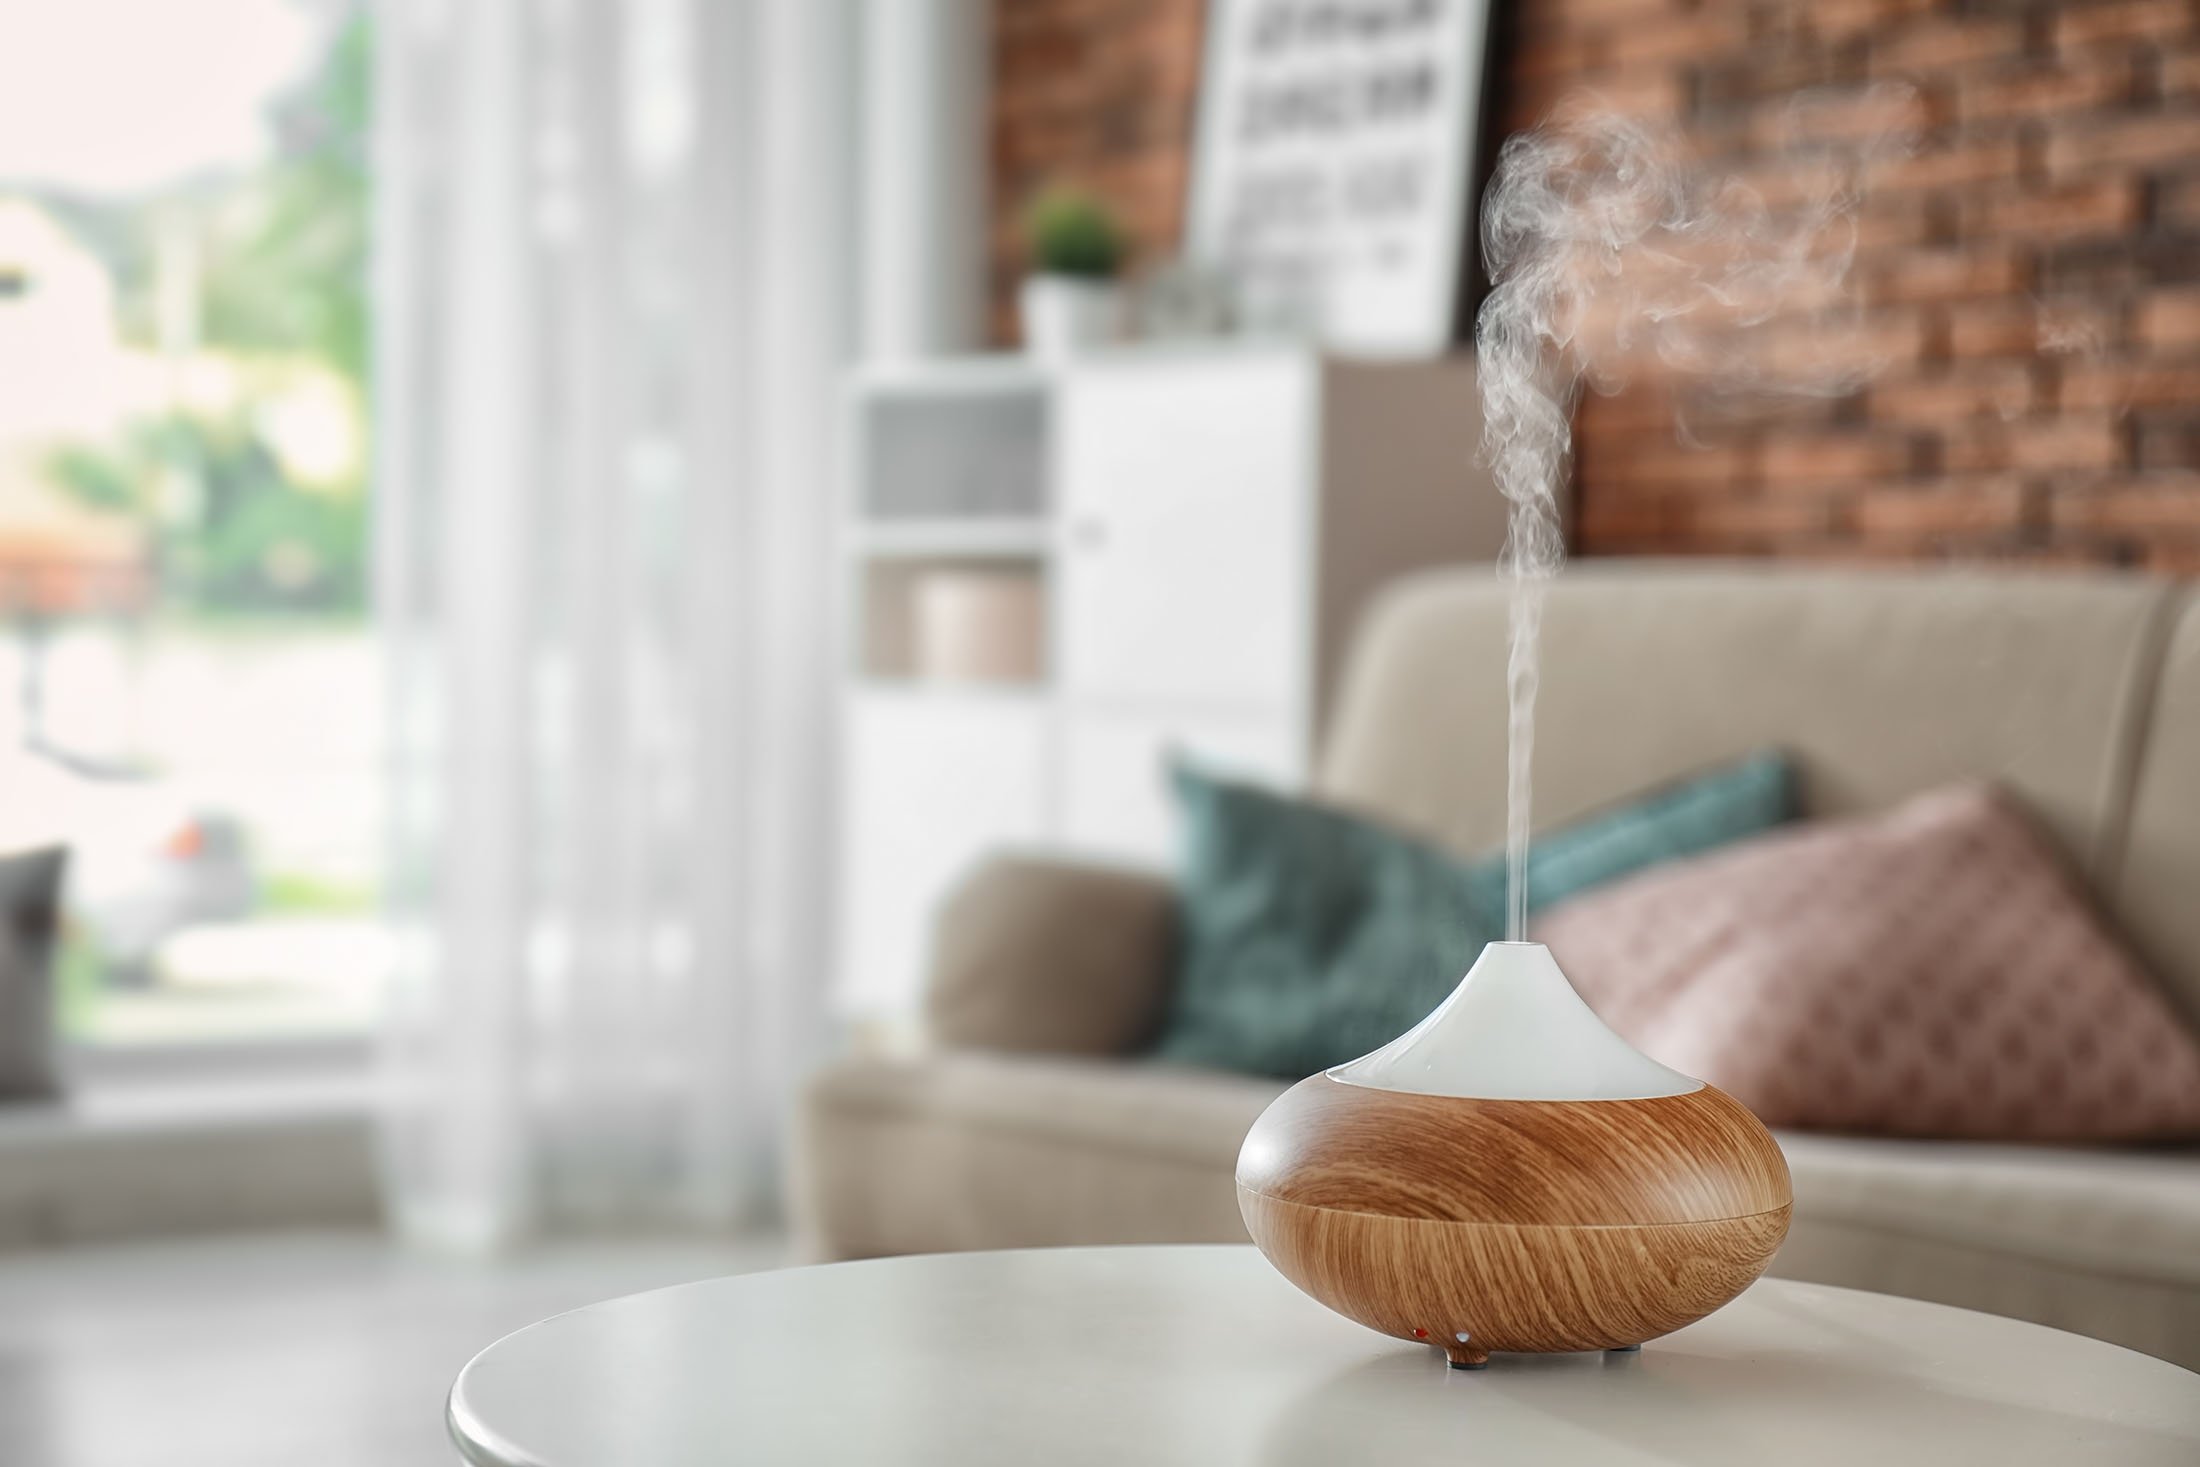 Some electric humidifiers can be turned into aromatherapy diffusers with the help of essential oils. (Shutterstock Photo)